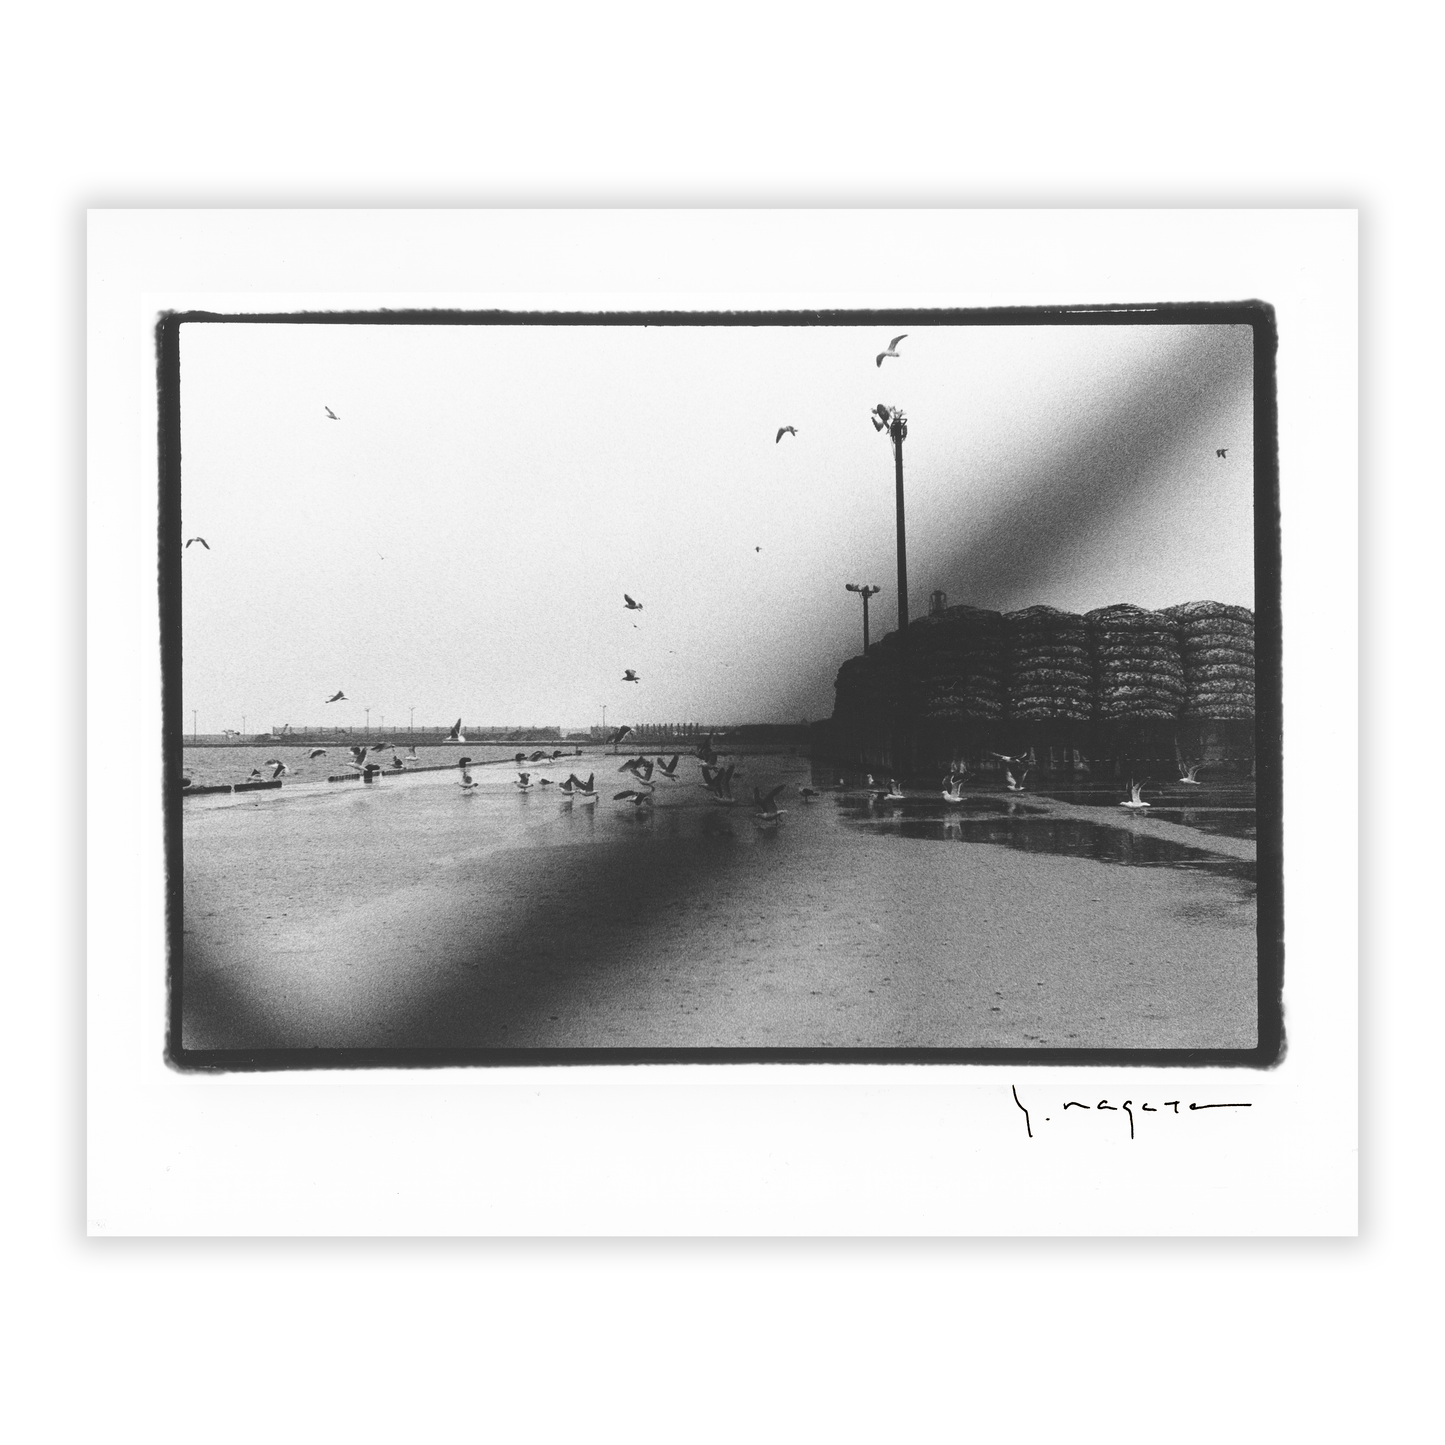 A Place with Scallops - Darkroom Print